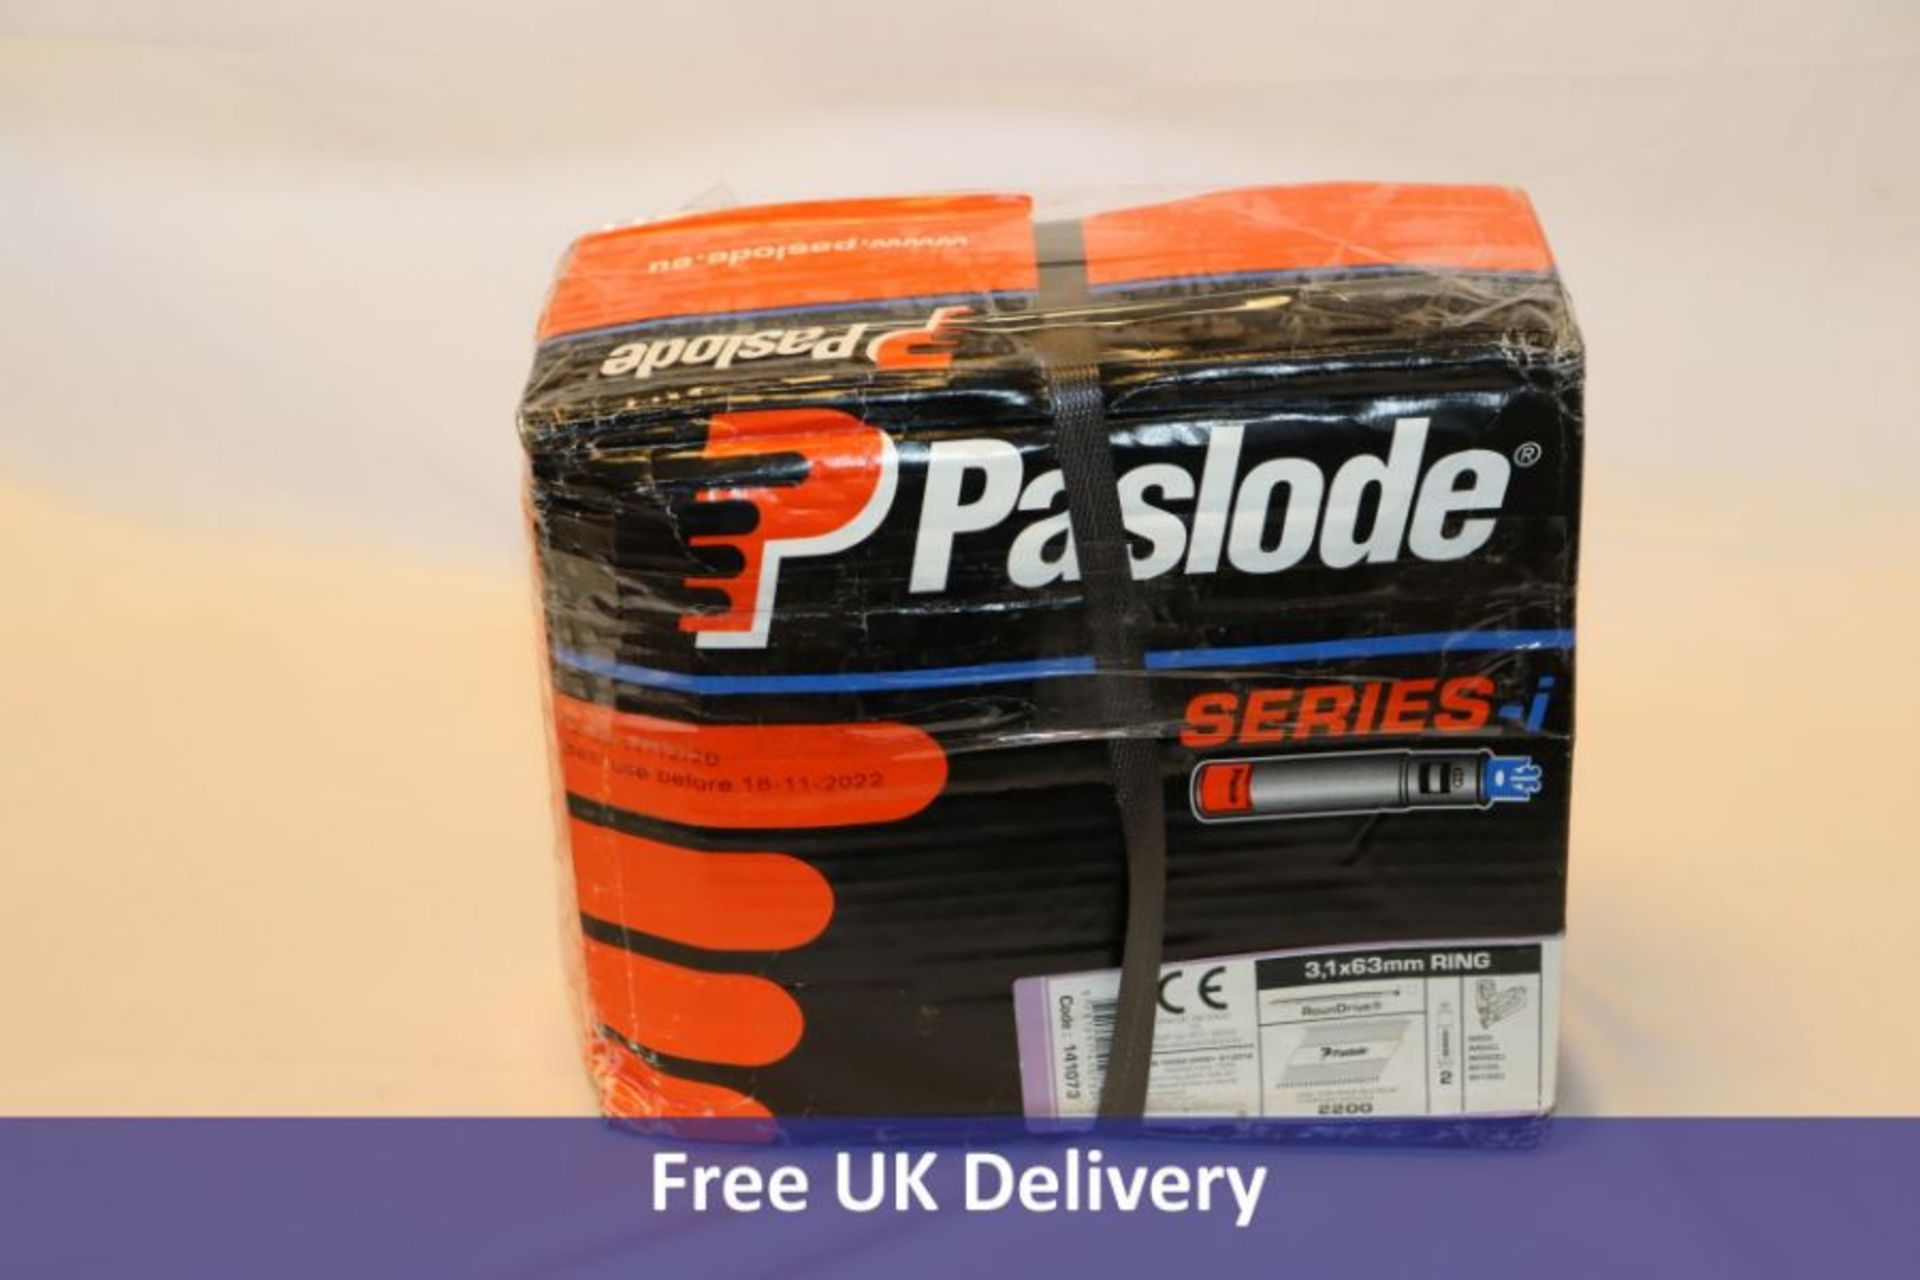 Two Boxes of PASLODE Series-i, 3.1x63mm Ring Nails, Galvanised, Approximately 2200 Per Box. Best Use